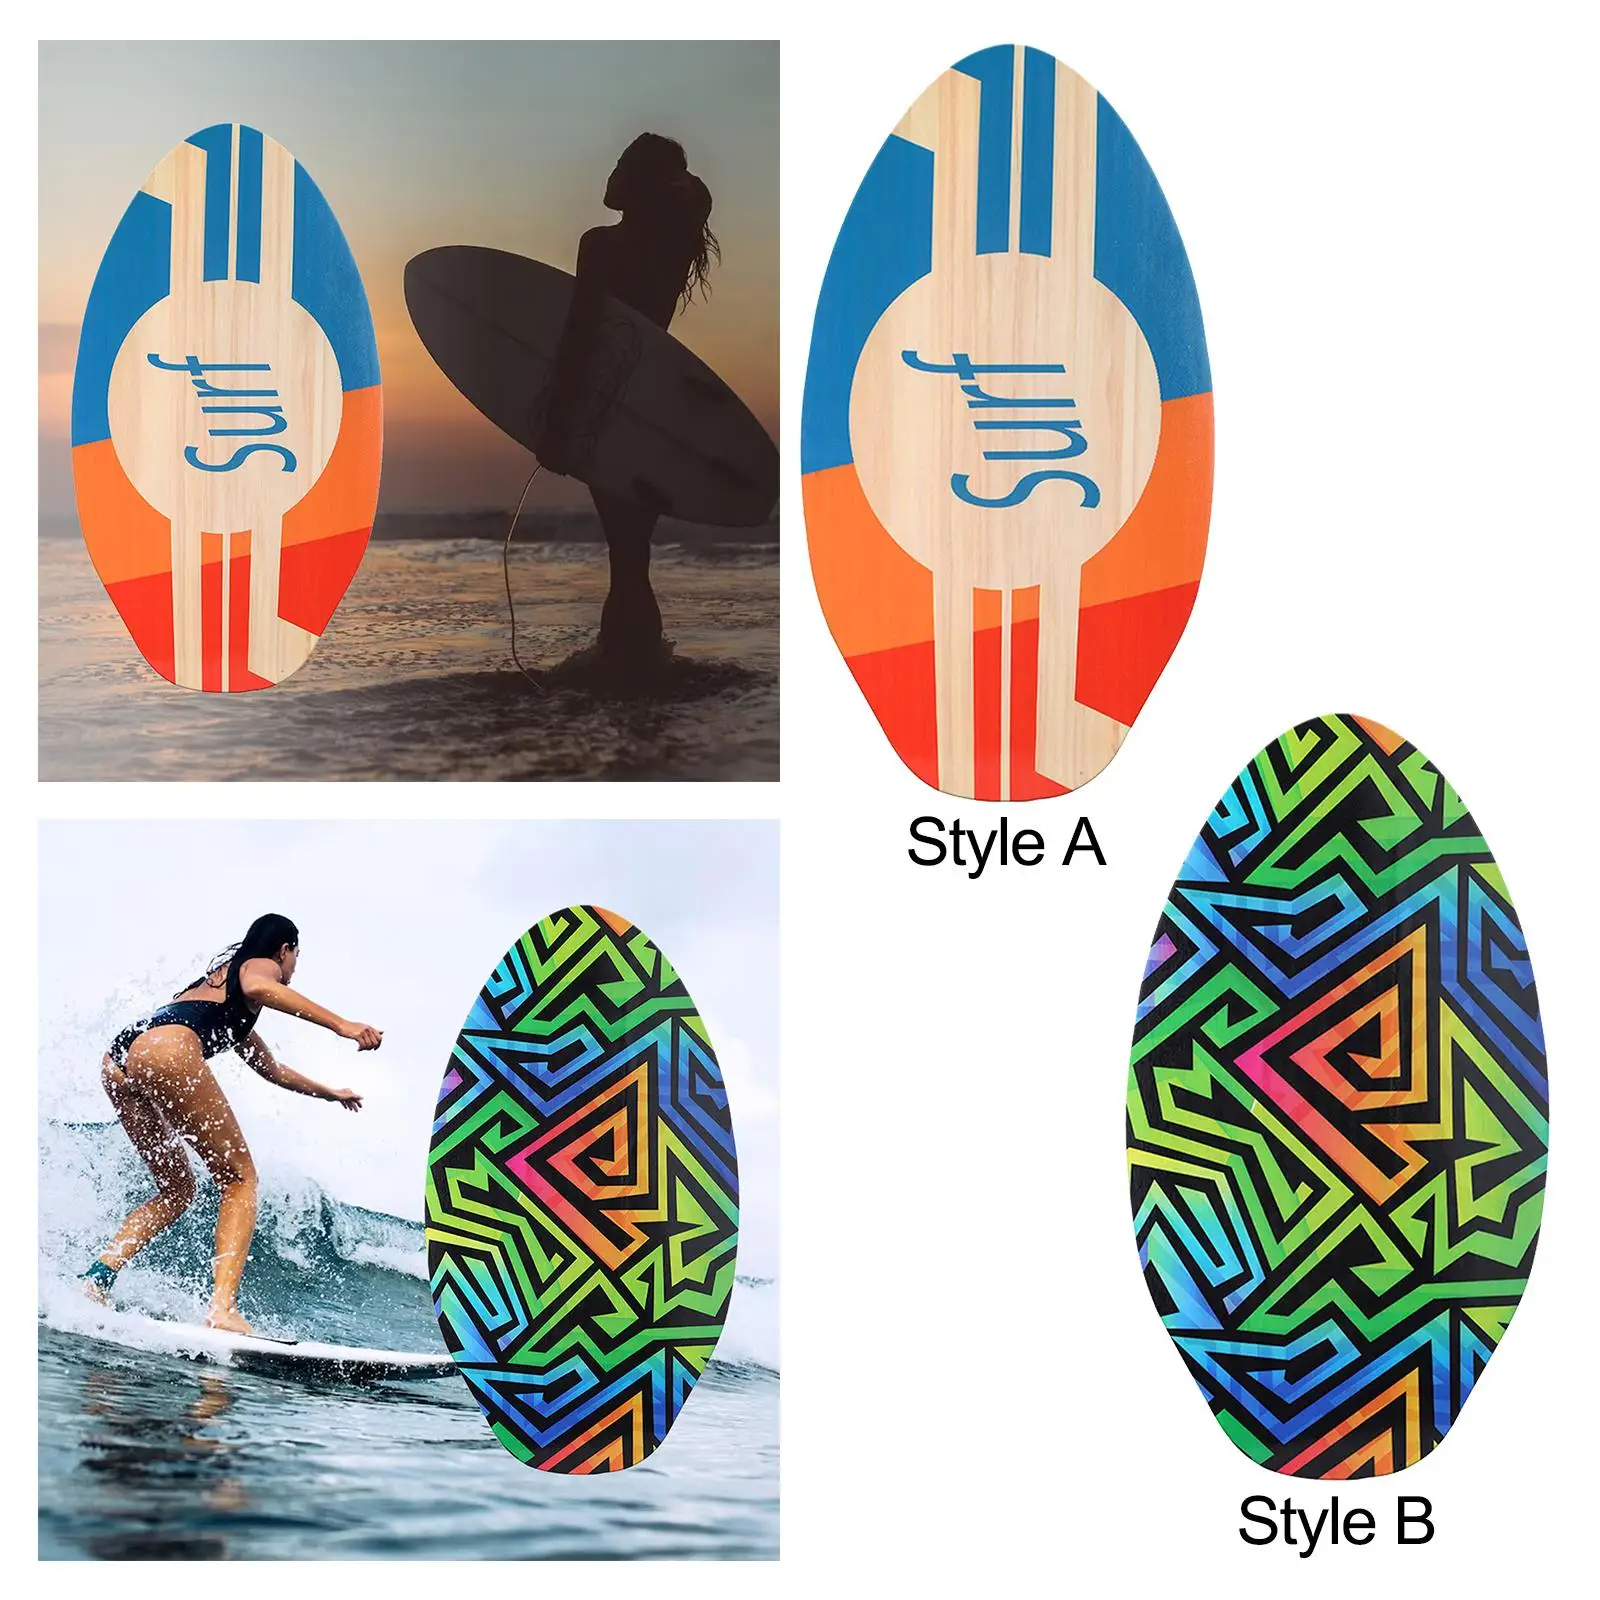 Skimboard Surf Board 35 Inches Shallow Water Standing Wooden Skim Board Small Surfboard for Adults Beginners Kids Beach Toys